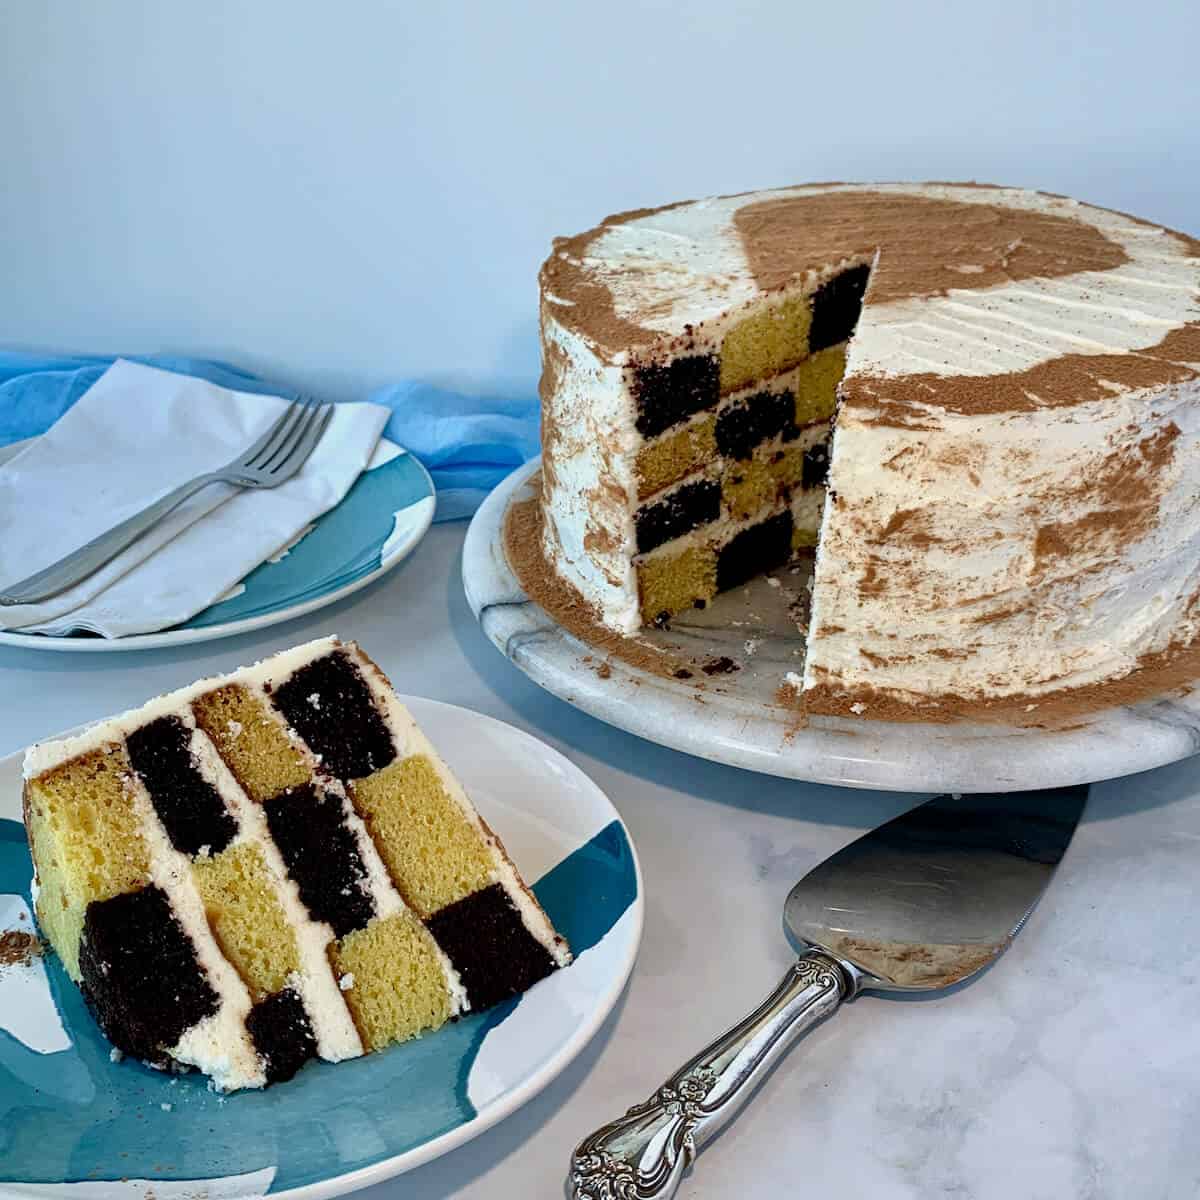 Checkerboard cake slice on a blue & white plate next to a cake serve with cake on plate and fork in background.